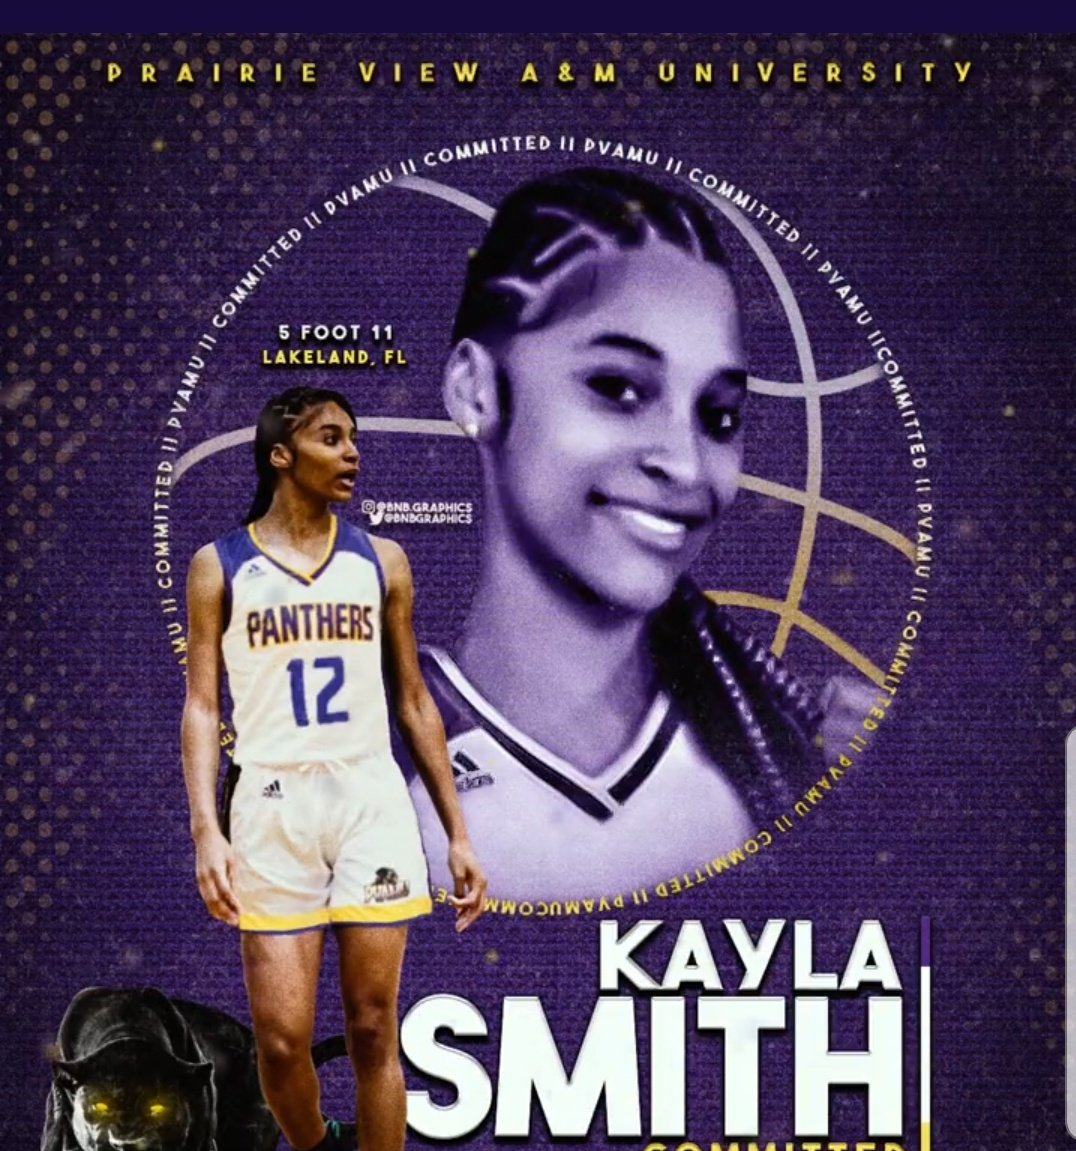 Kayla Smith from White Haven High School Florida has signed with Prairie View A&M University Lady Panthers Basketball https://t.co/RA7CNoDoXX